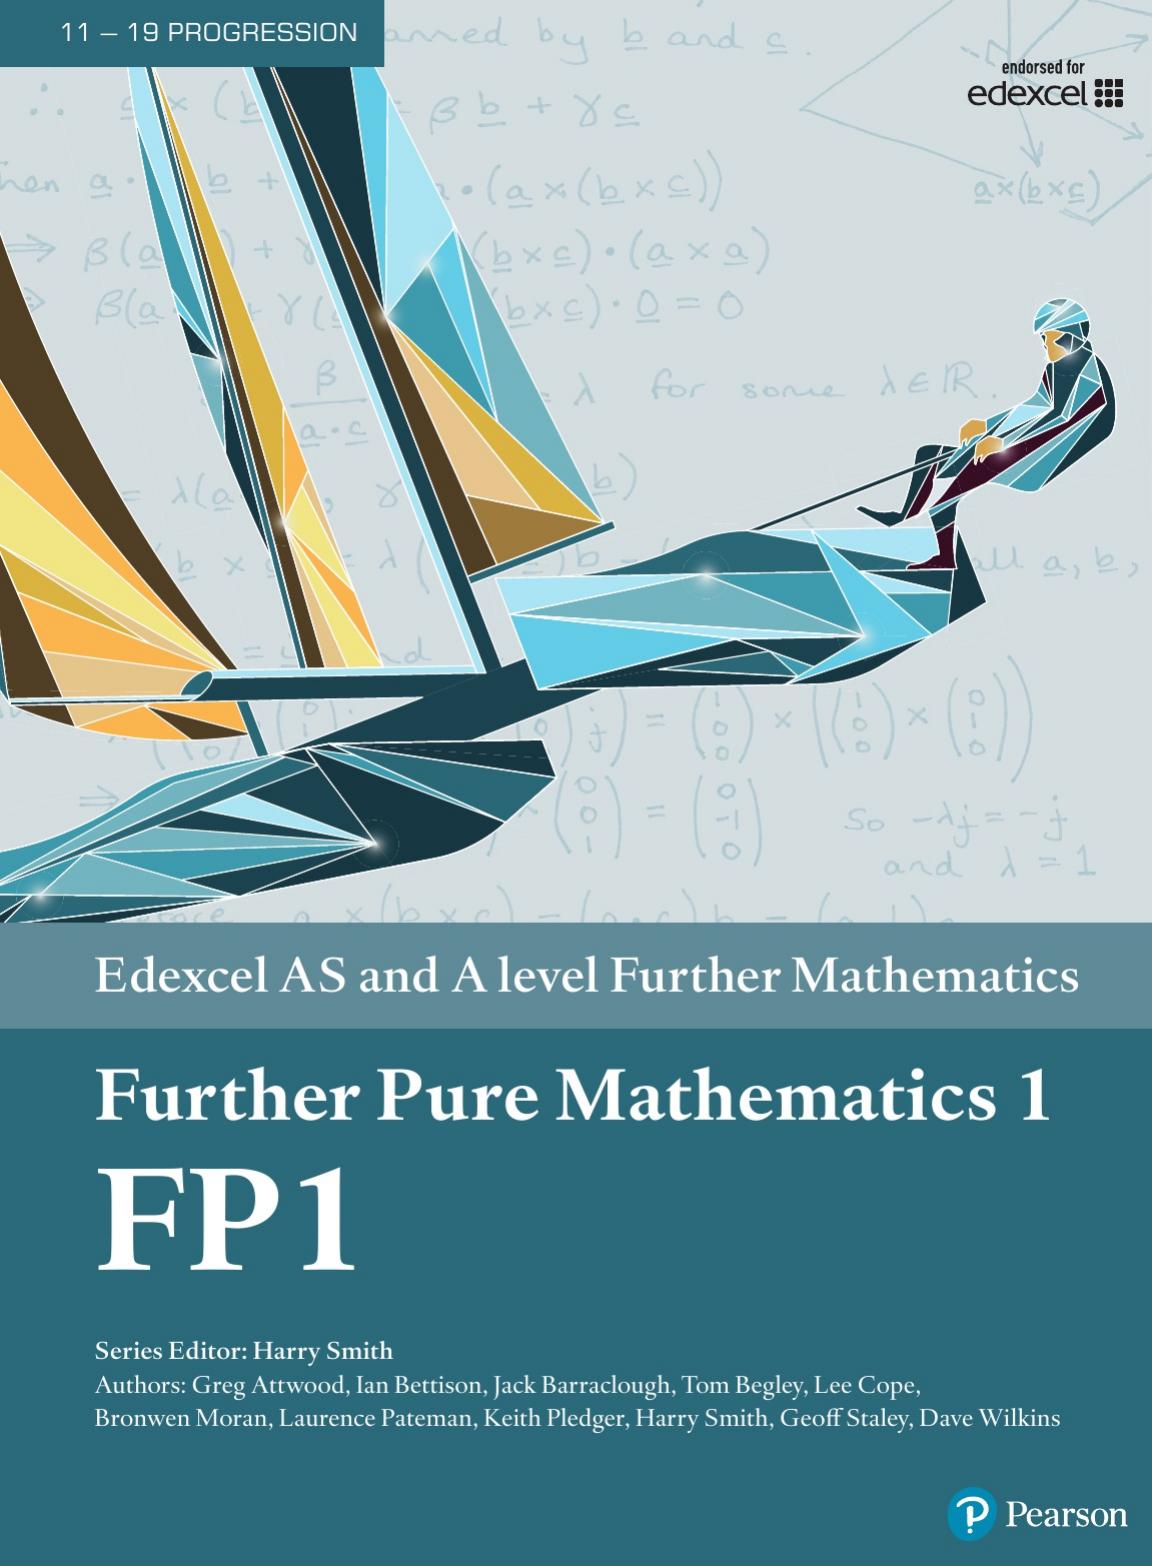 Edexcel AS and A level Further Mathematics Further Pure Mathematics 1 by Pearson